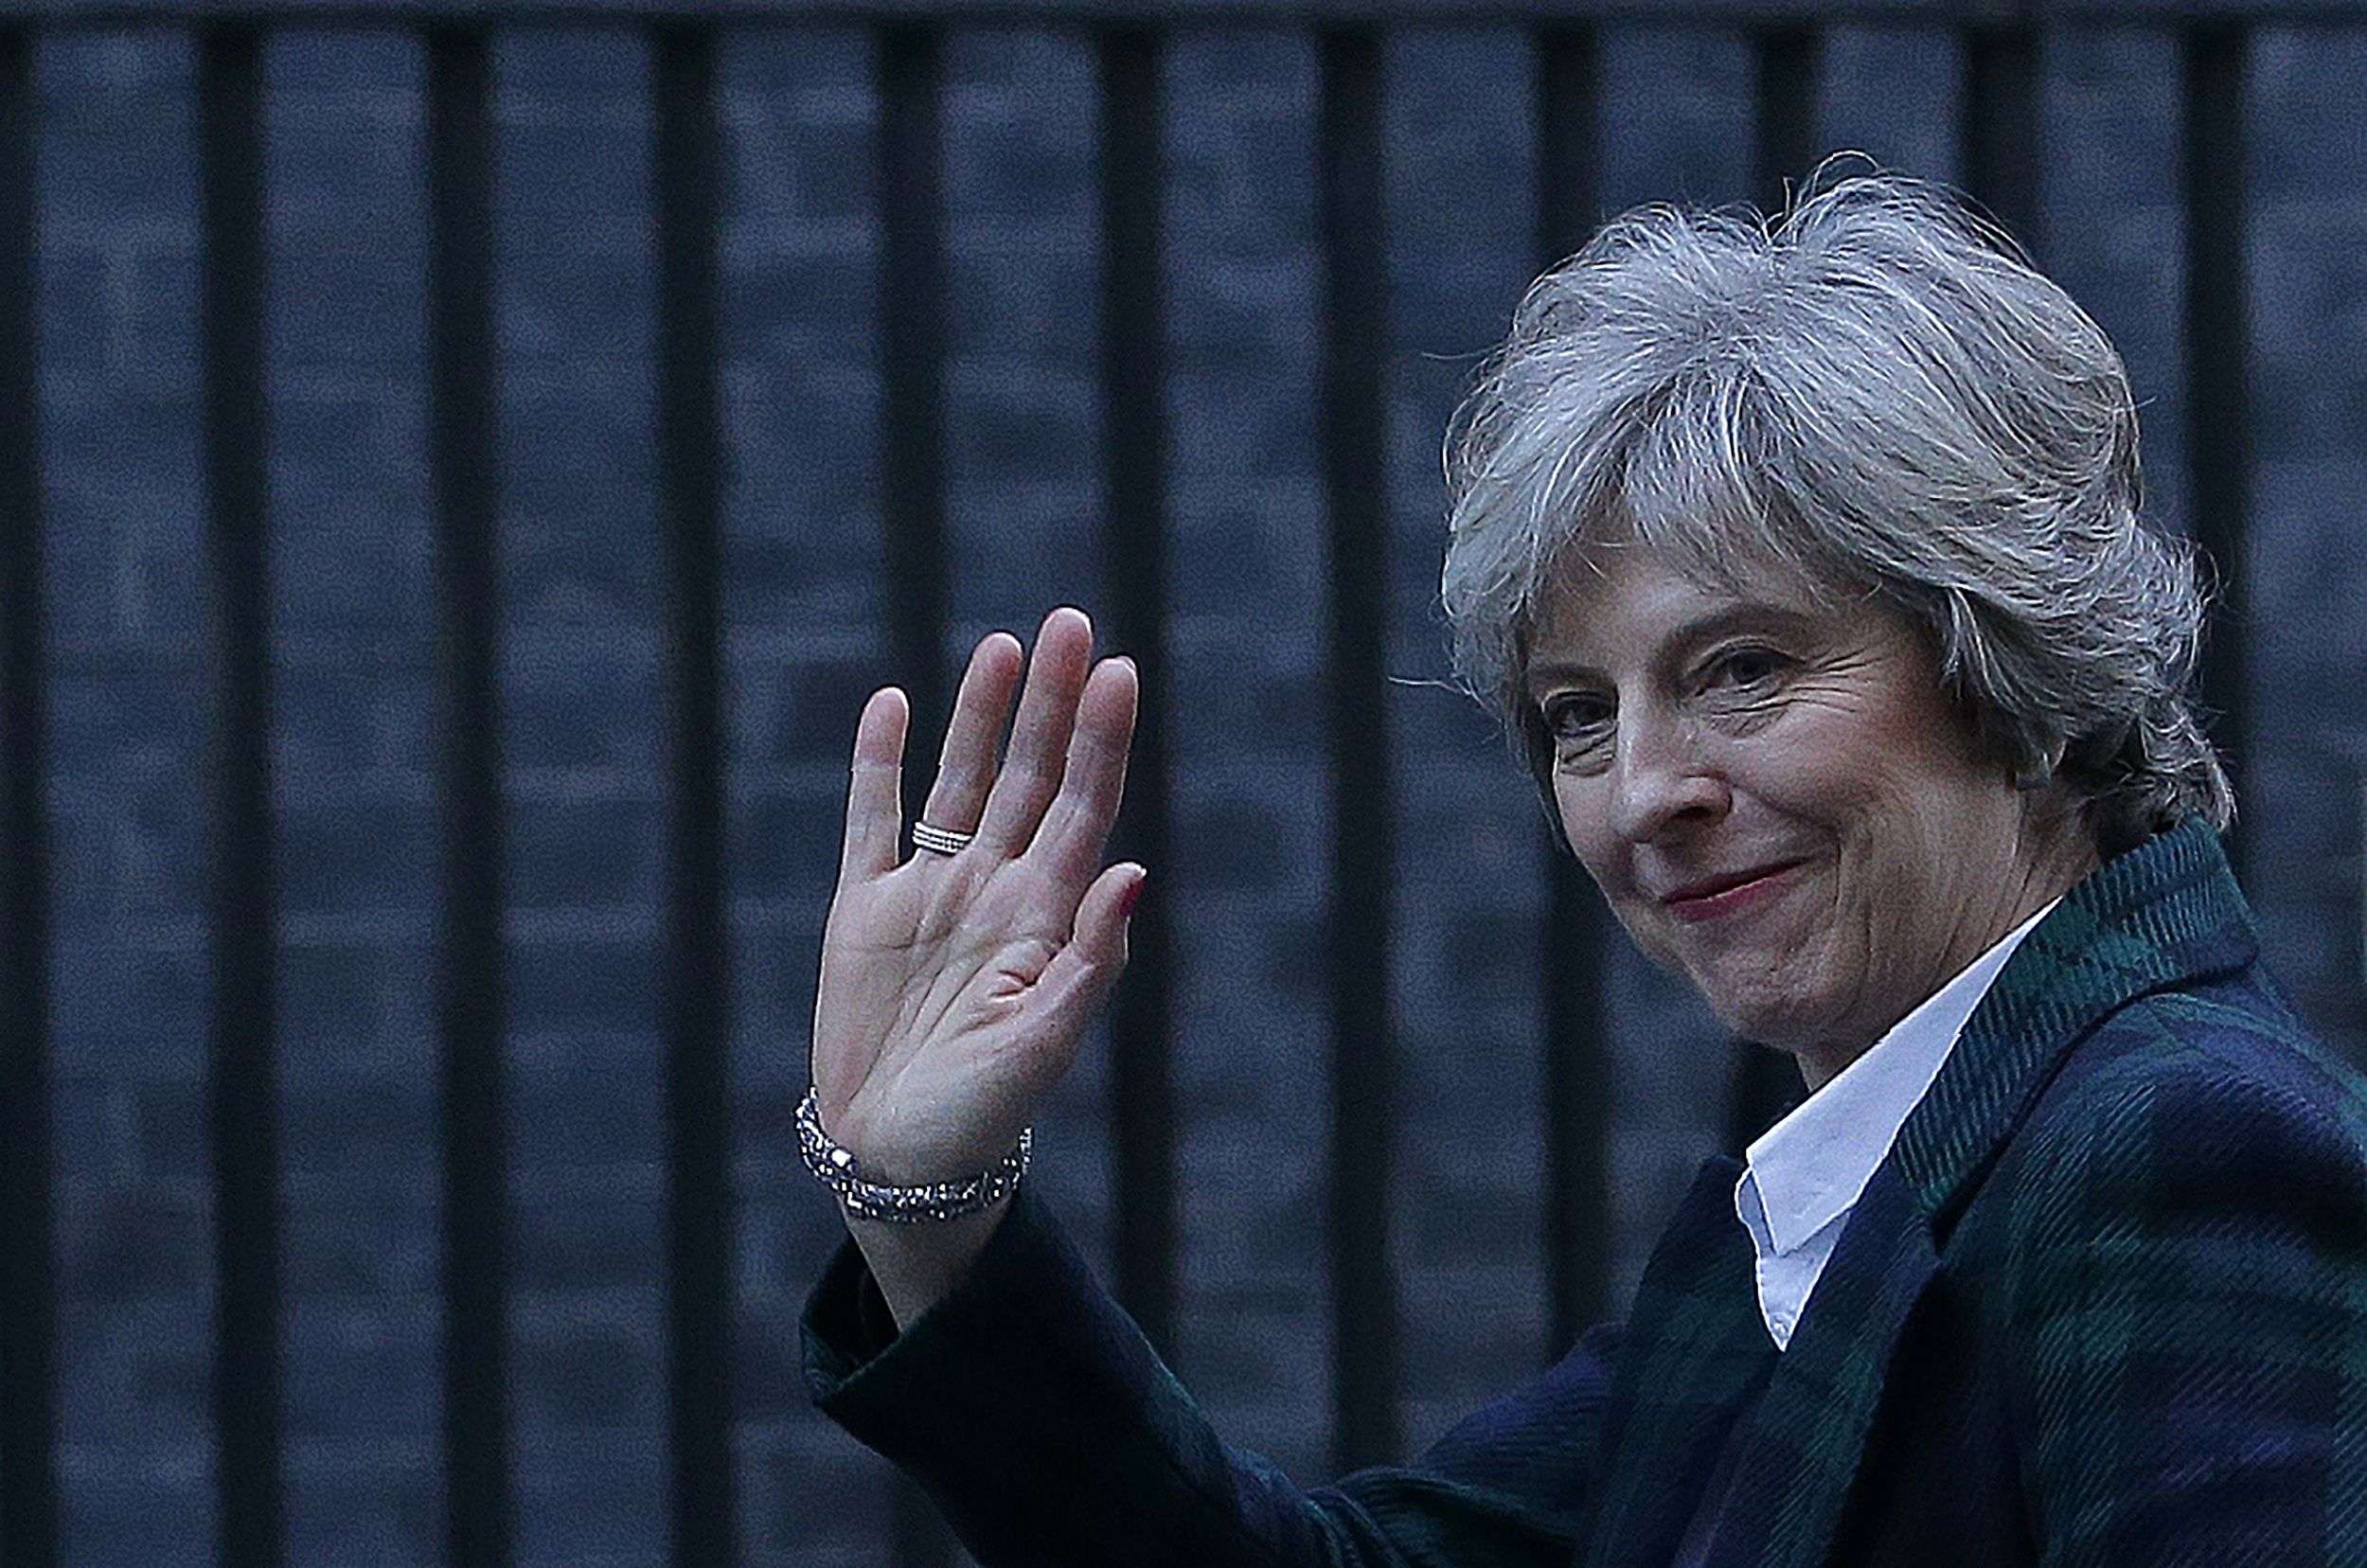 Prime Minister Theresa May said Britain would make a ‘hard exit’ from the European Union. Photo: AFP